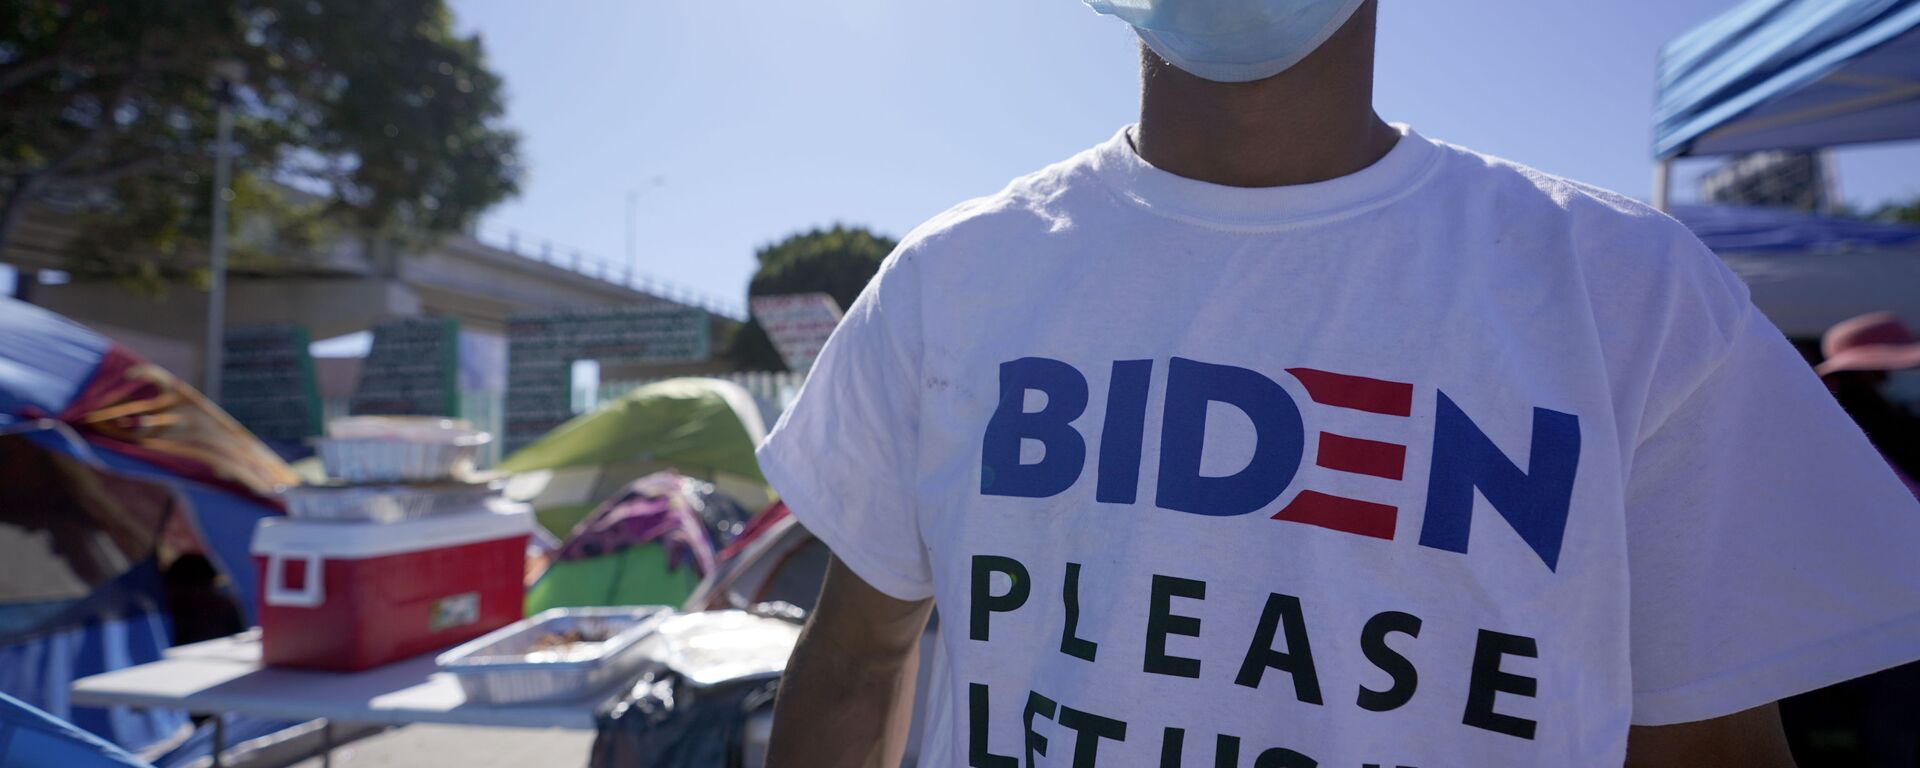 A Honduran man seeking asylum in the United States wears a shirt that reads, Biden please let us in, as he stands among tents that line an entrance to the border crossing, Monday, March 1, 2021, in Tijuana, Mexico. - Sputnik International, 1920, 28.12.2022